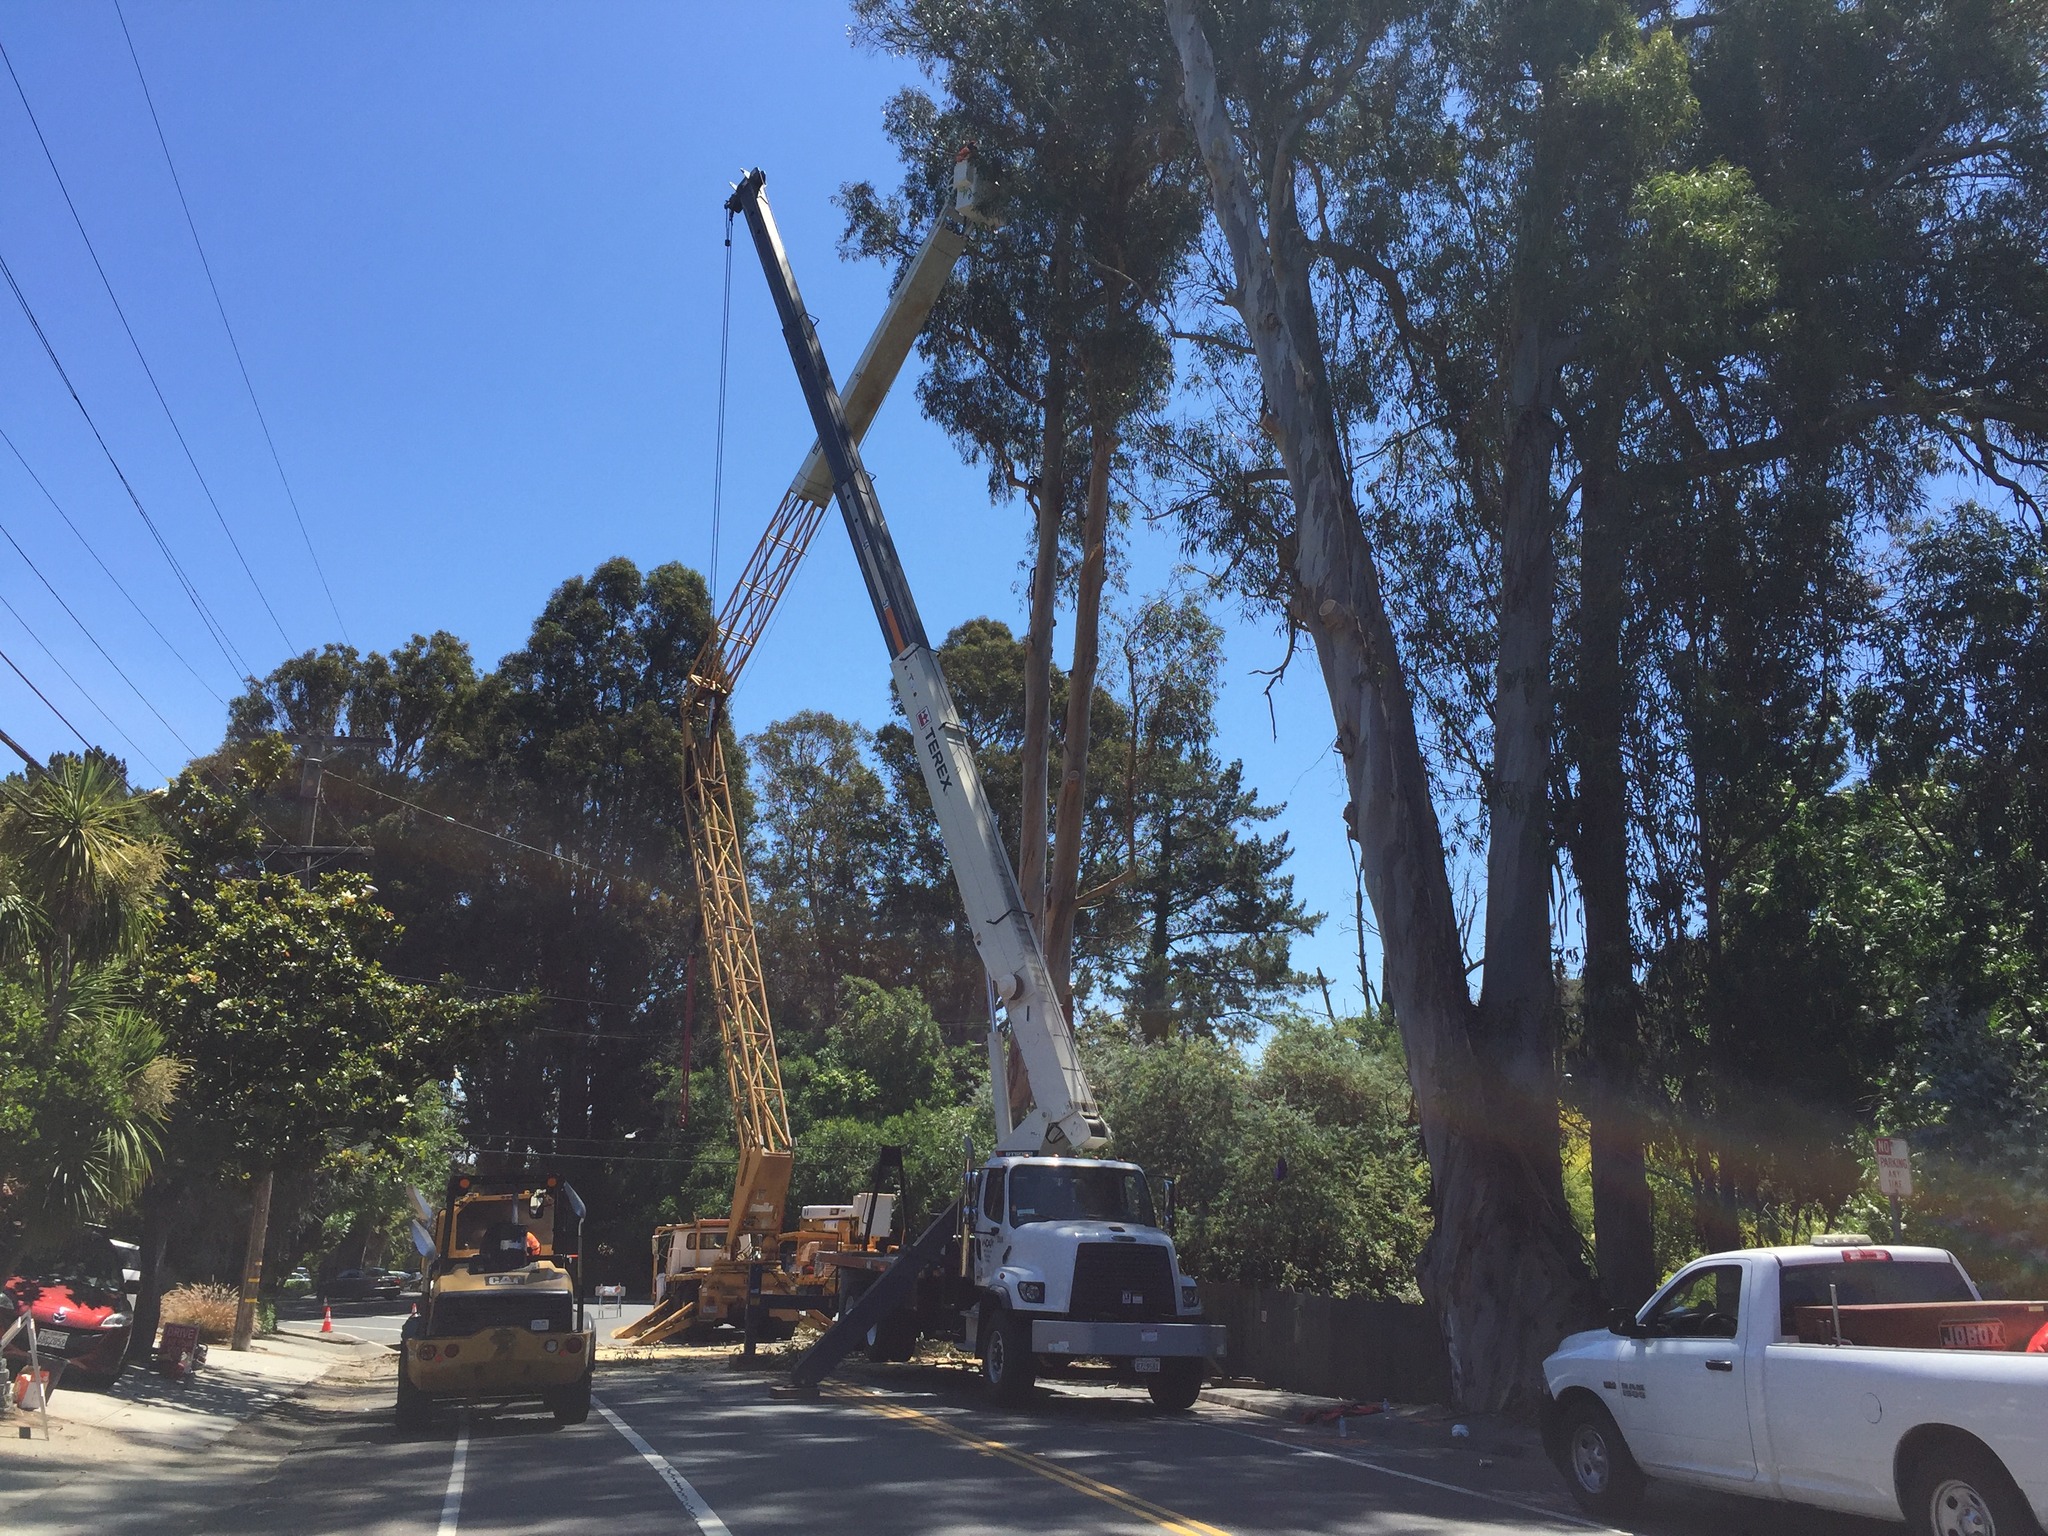 Hazardous Eucalyptus trees will be removed on San Carlos Avenue between Alameda de las Pulgas and Cordilleras Avenue in San Carlos from Monday, July 25, through about Aug. 12, the city has announced. "Professional Tree Care Company (PTC) will remove approximately 36 eucalyptus and other trees that pose a community safety threat due to their large size, frequent limb failure, and risk of falling," the city said. For public safety, PTC will close San Carlos Avenue in both directions during the tree removal, which will occur Monday through Friday between 9 a.m. and 3 p.m. The first closure, beginning in August, will be between Alameda de las Pulgas and Cordilleras Avenue from July 25 through Aug. 2. The second closure will be between Cordilleras Avenue and Sycamore Street and the small portion of Cordilleras Avenue near the intersection of San Carlos Avenue. This closure will be in place beginning in August. Message boards will provide detour information. It's the third phase of the Eucalyptus Tree Removal Project. Find up-to-date information and detour maps here. Photo courtesy of the City of San Carlos